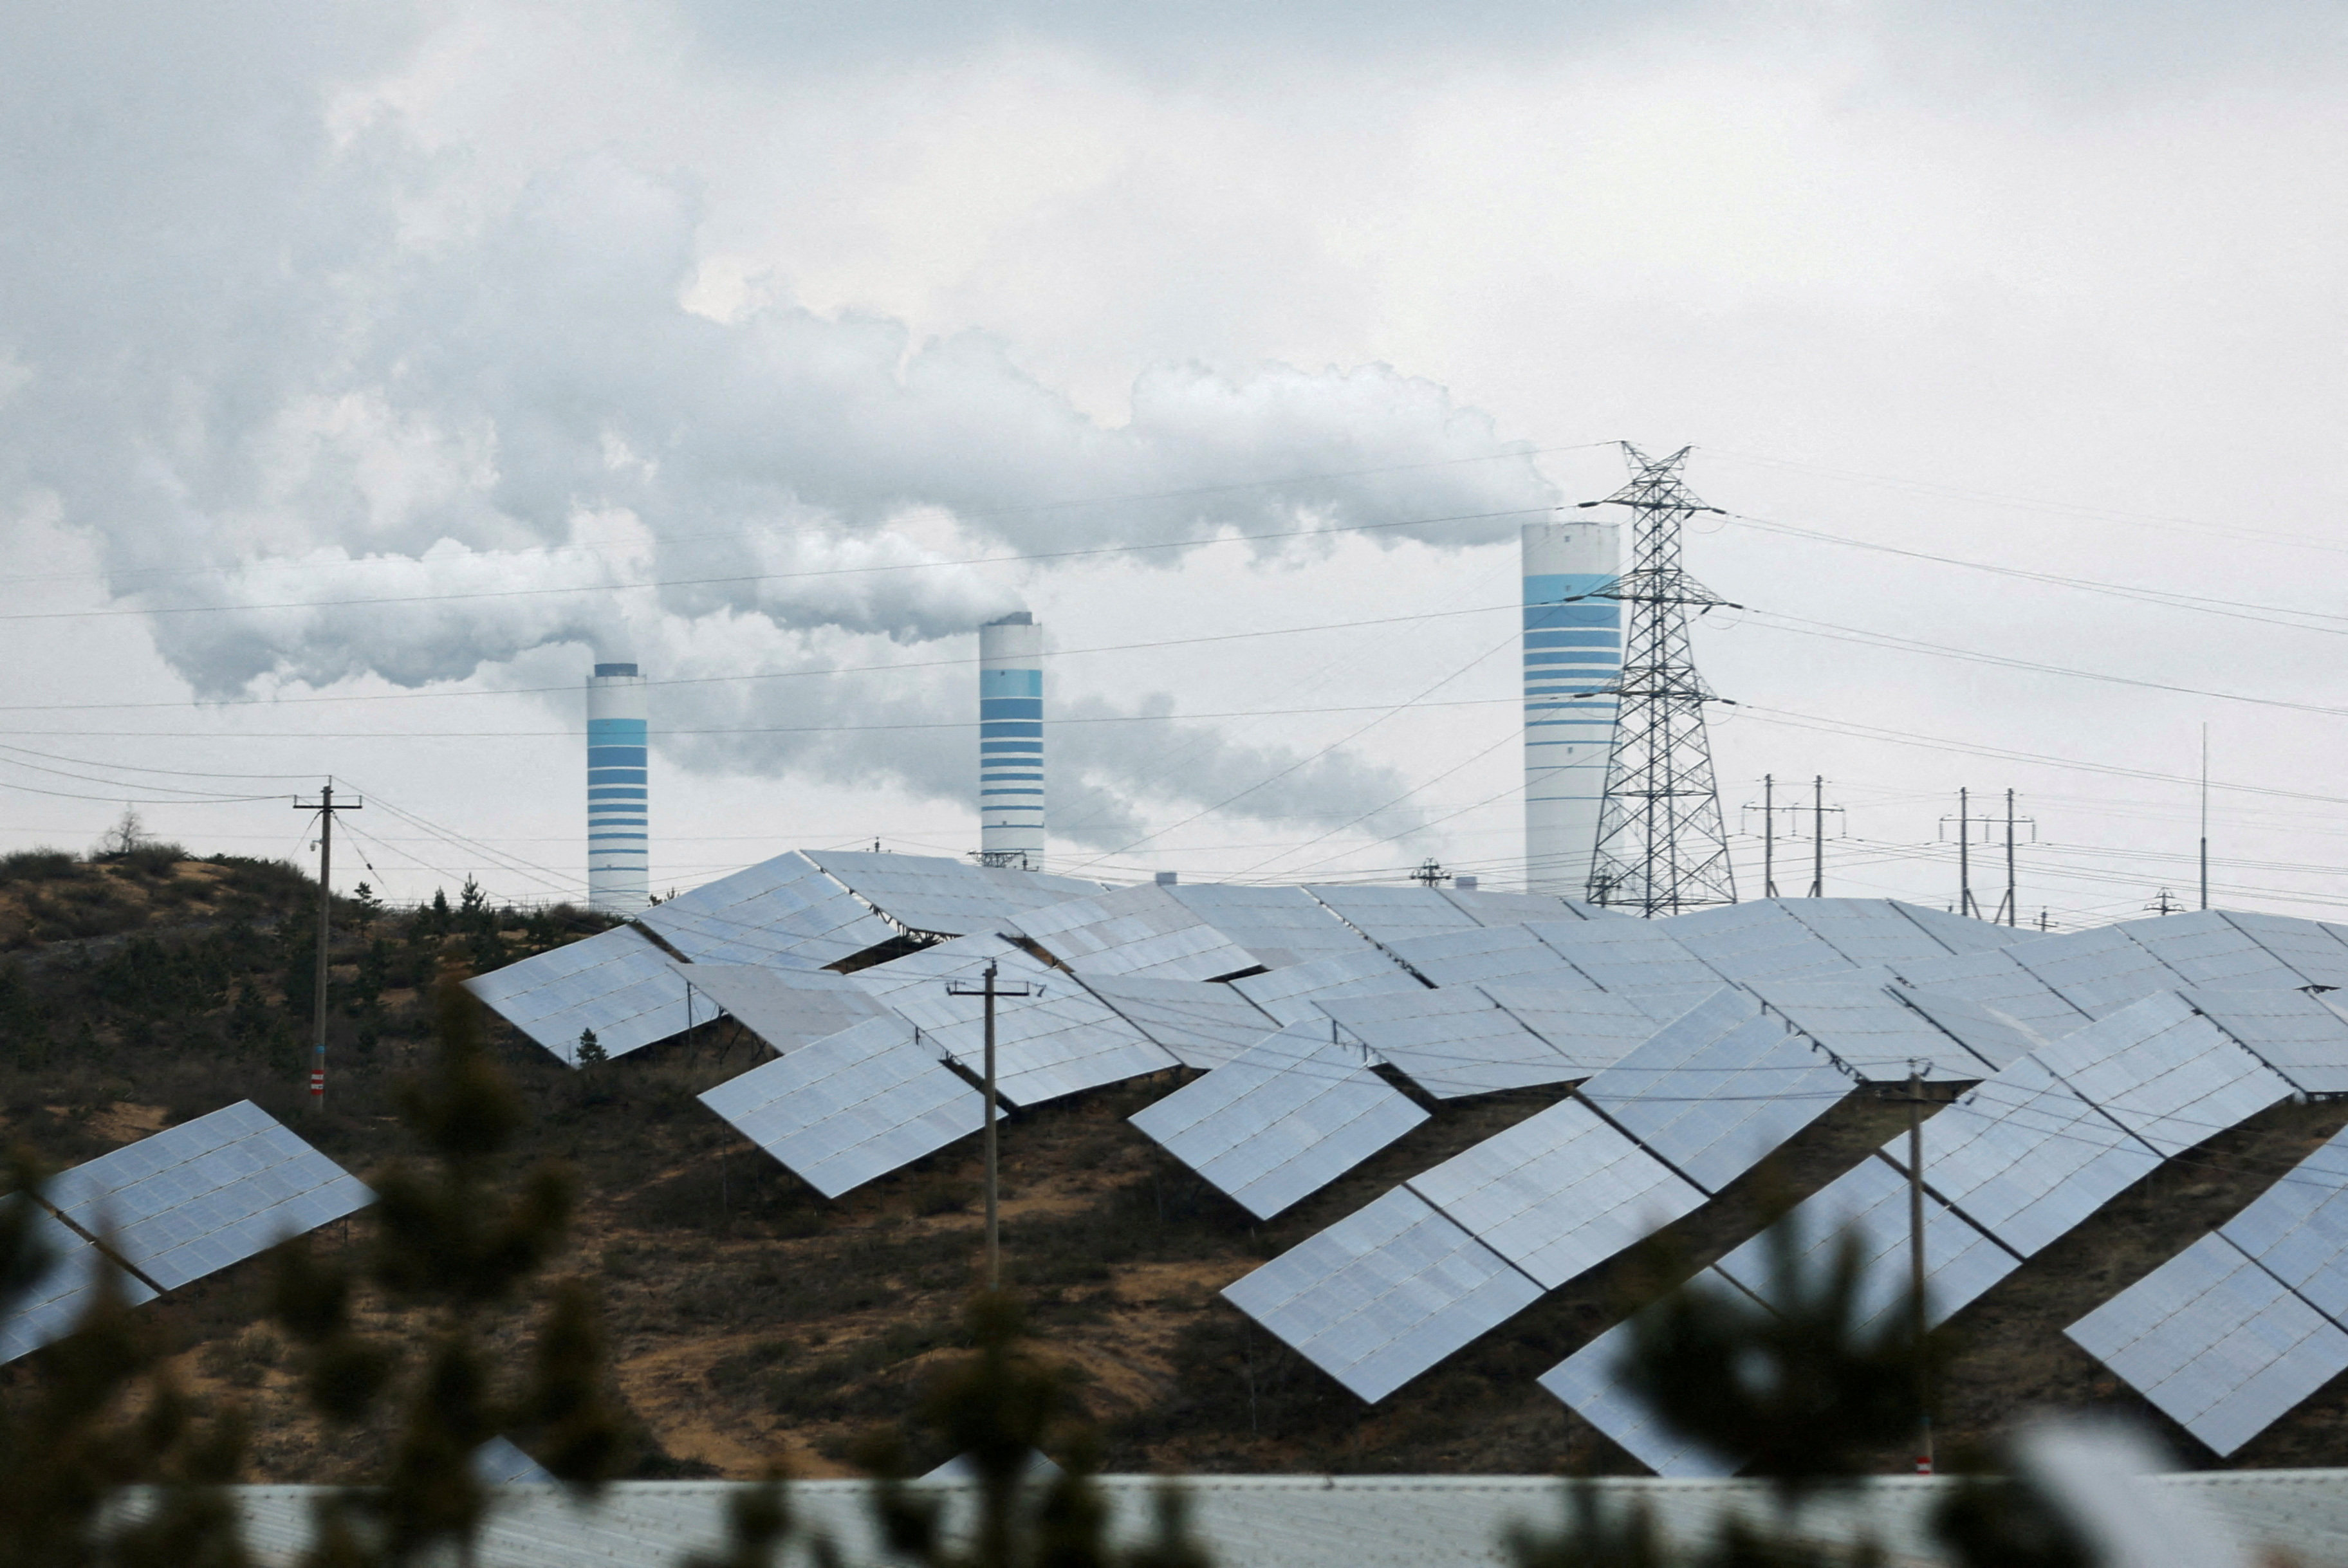 Smoke rises from chimneys near solar panels in Shaanxi province, China on April 24, 2023. Photo: Reuters